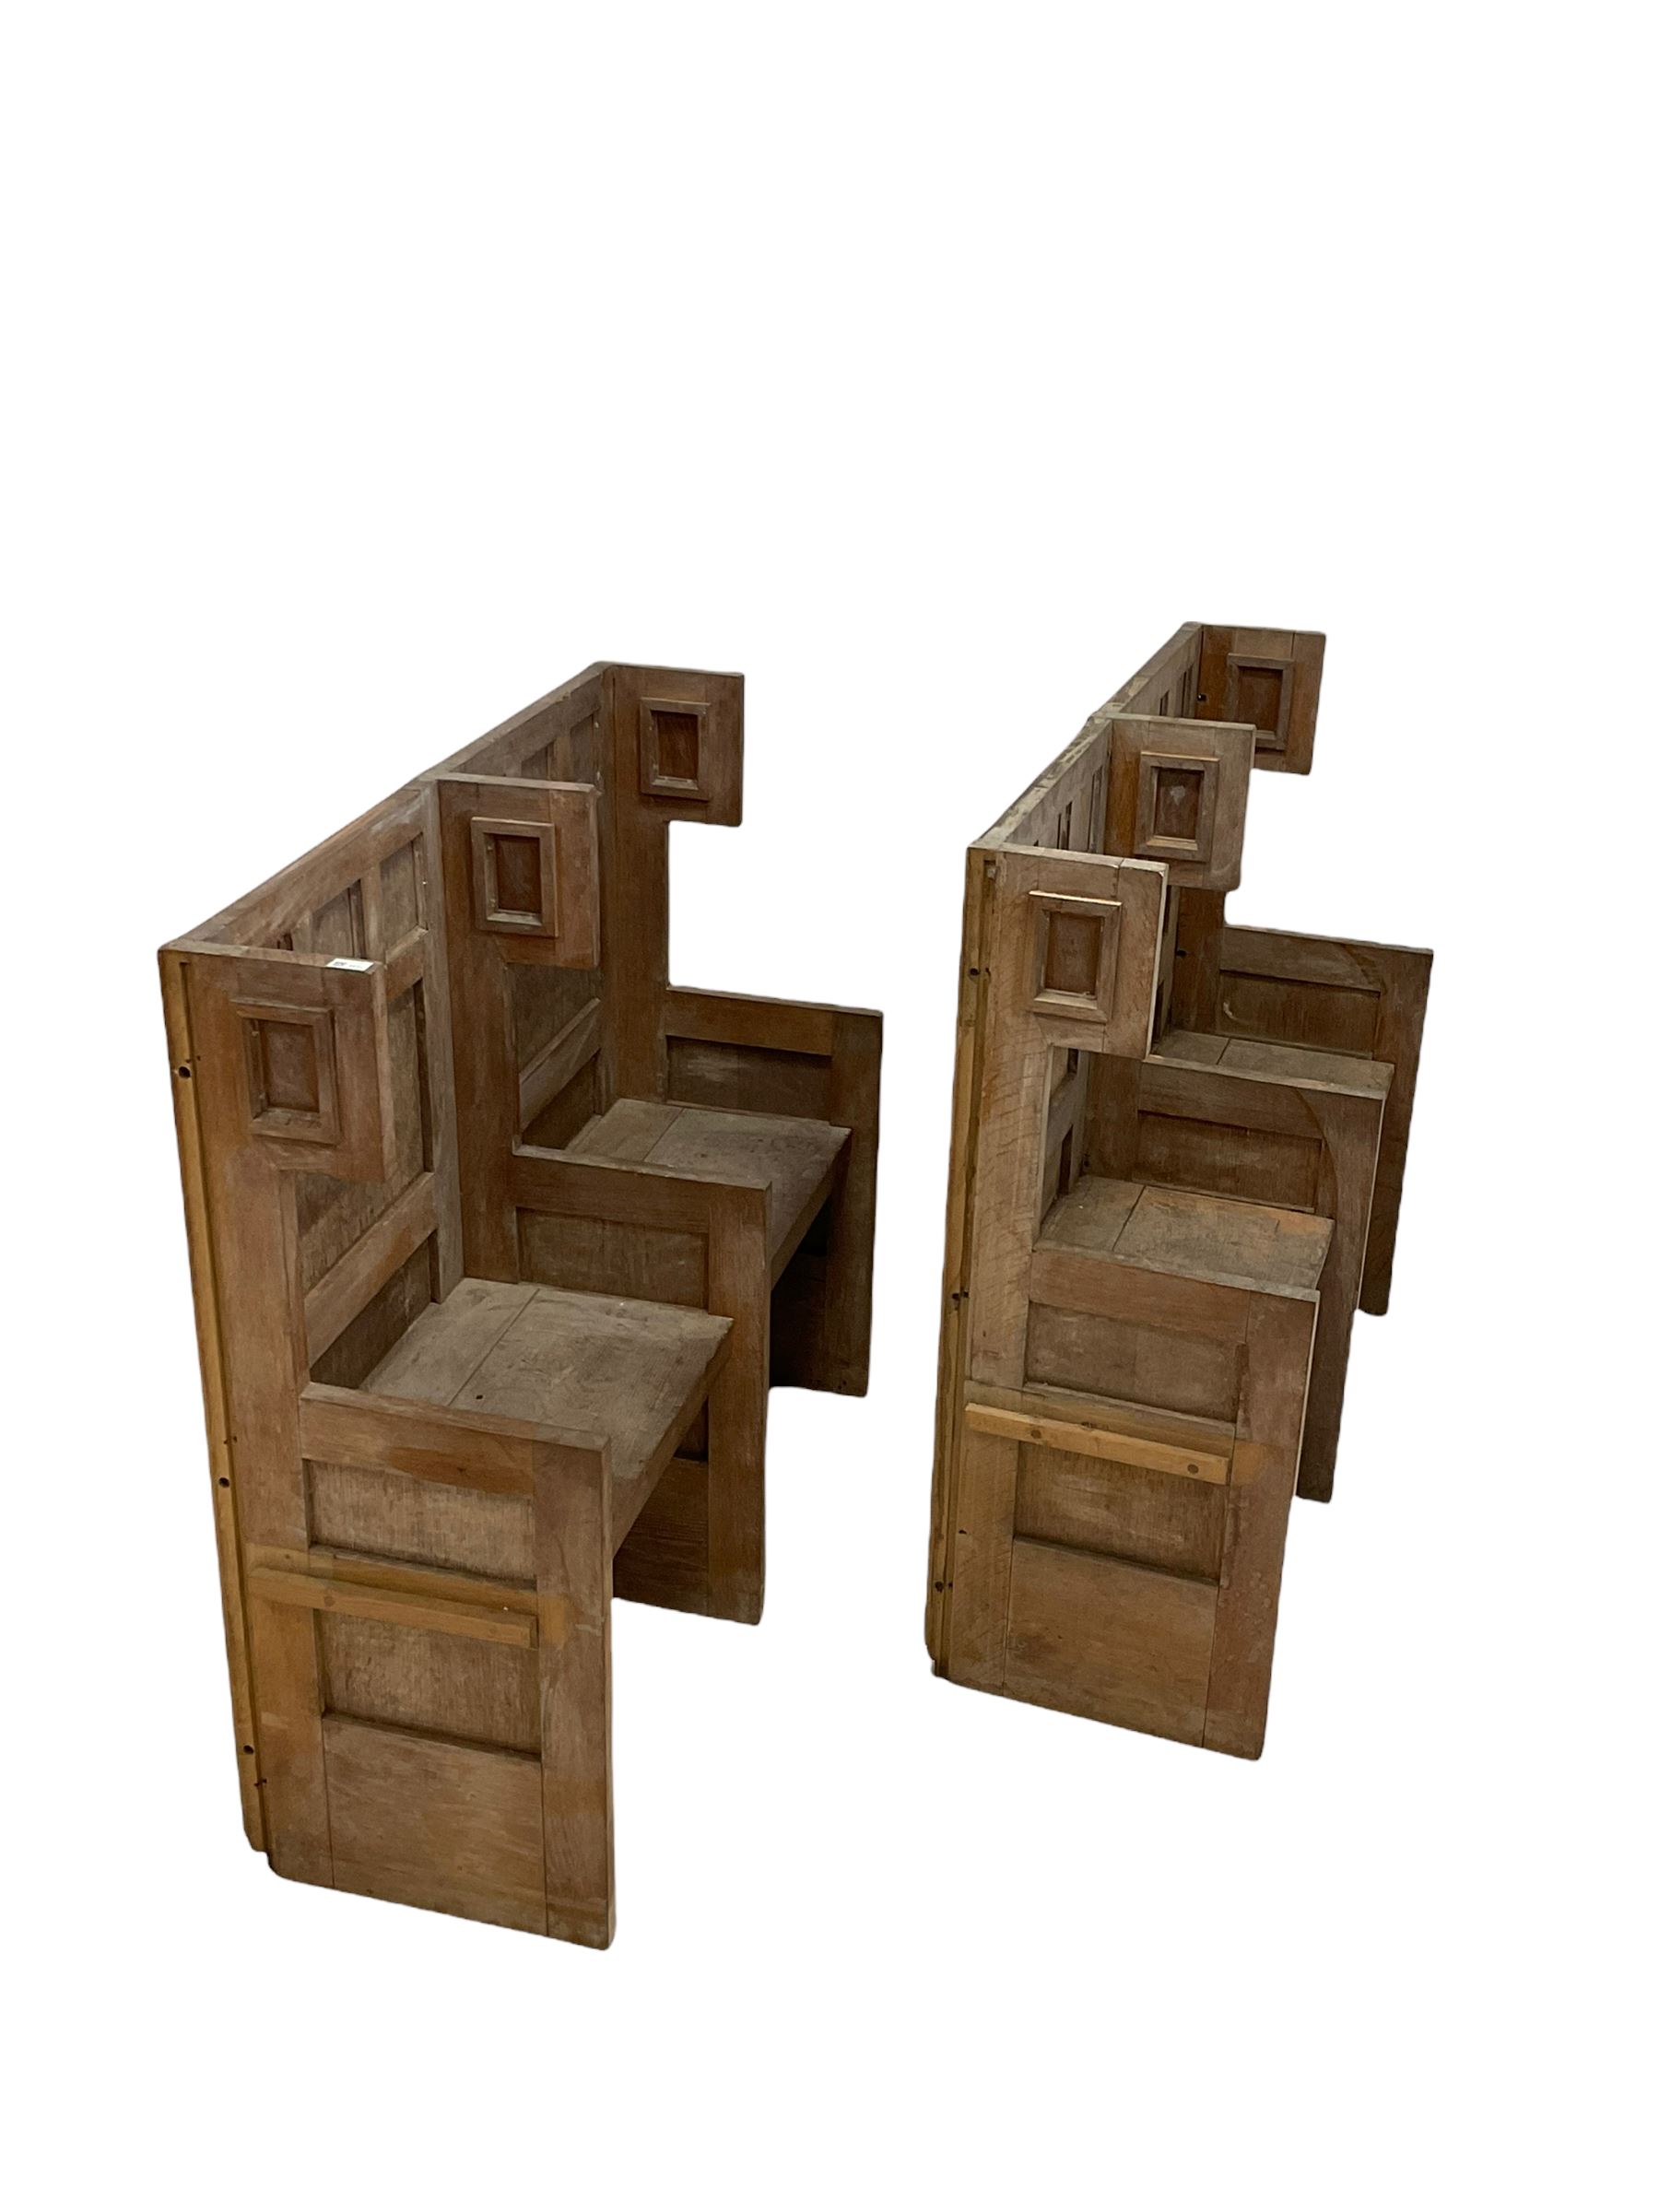 Pair of two seater oak priory pews with hinged seats W125cm - Image 2 of 7